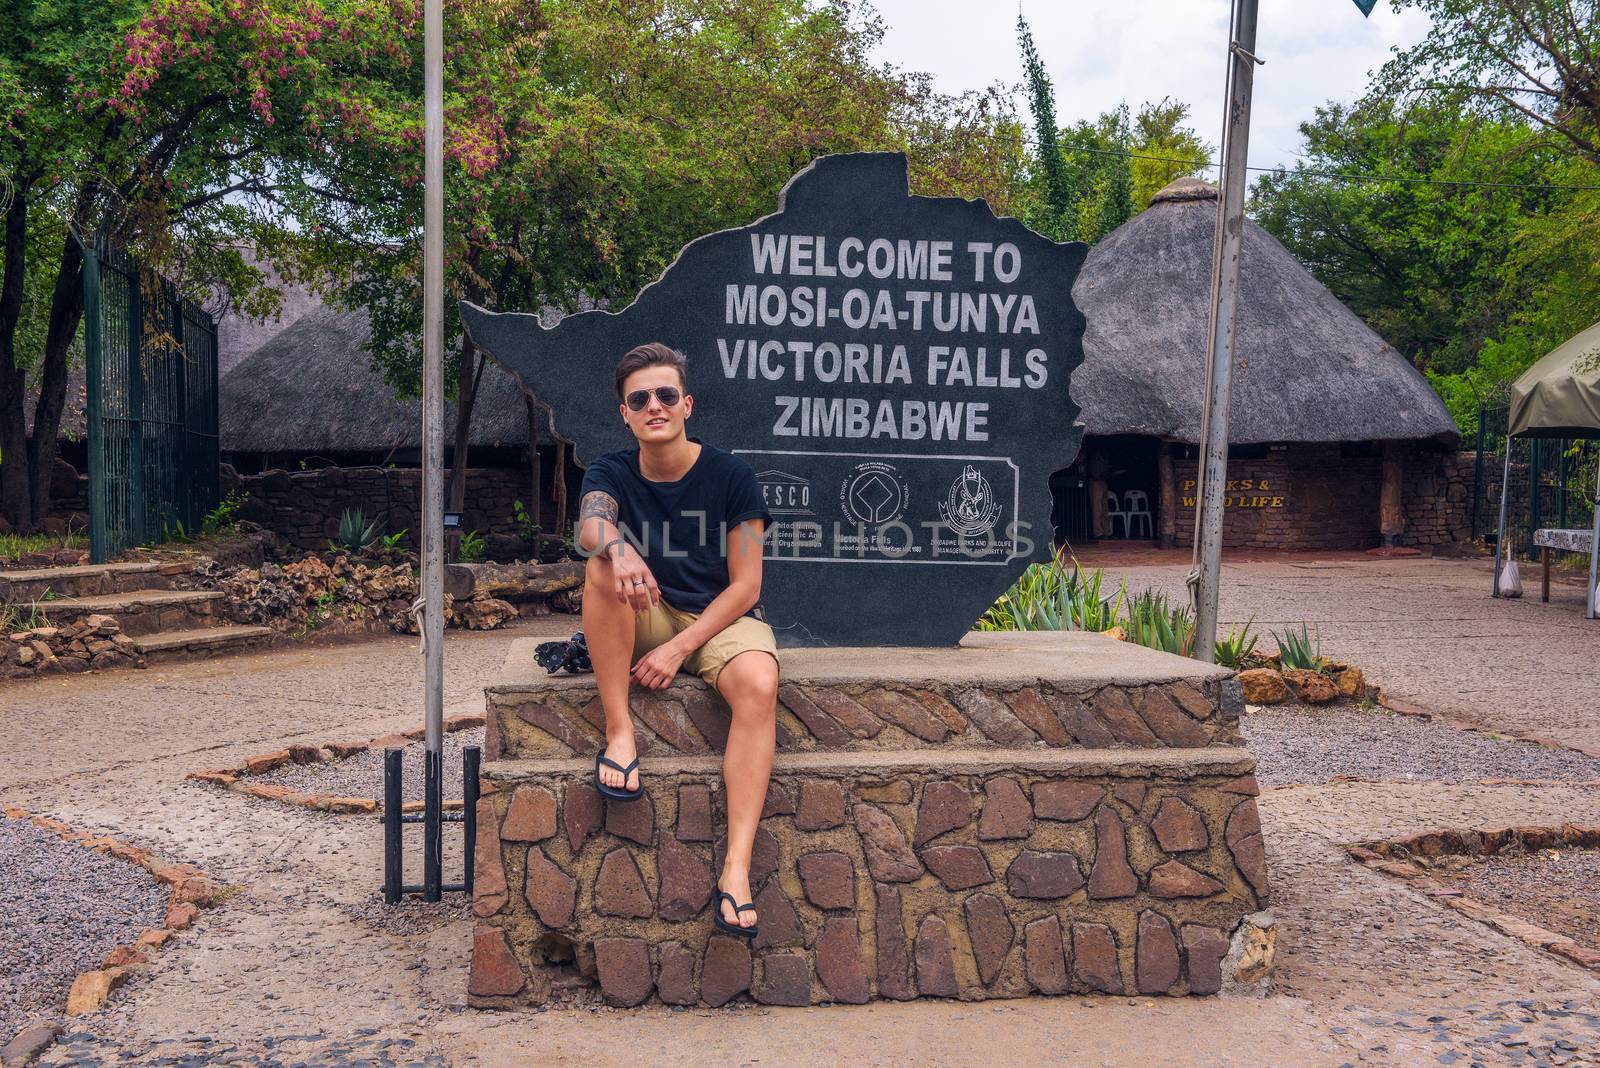 Tourist sits on the welcome sign placed at the entry of Victoria Falls, Zimbabwe by nickfox